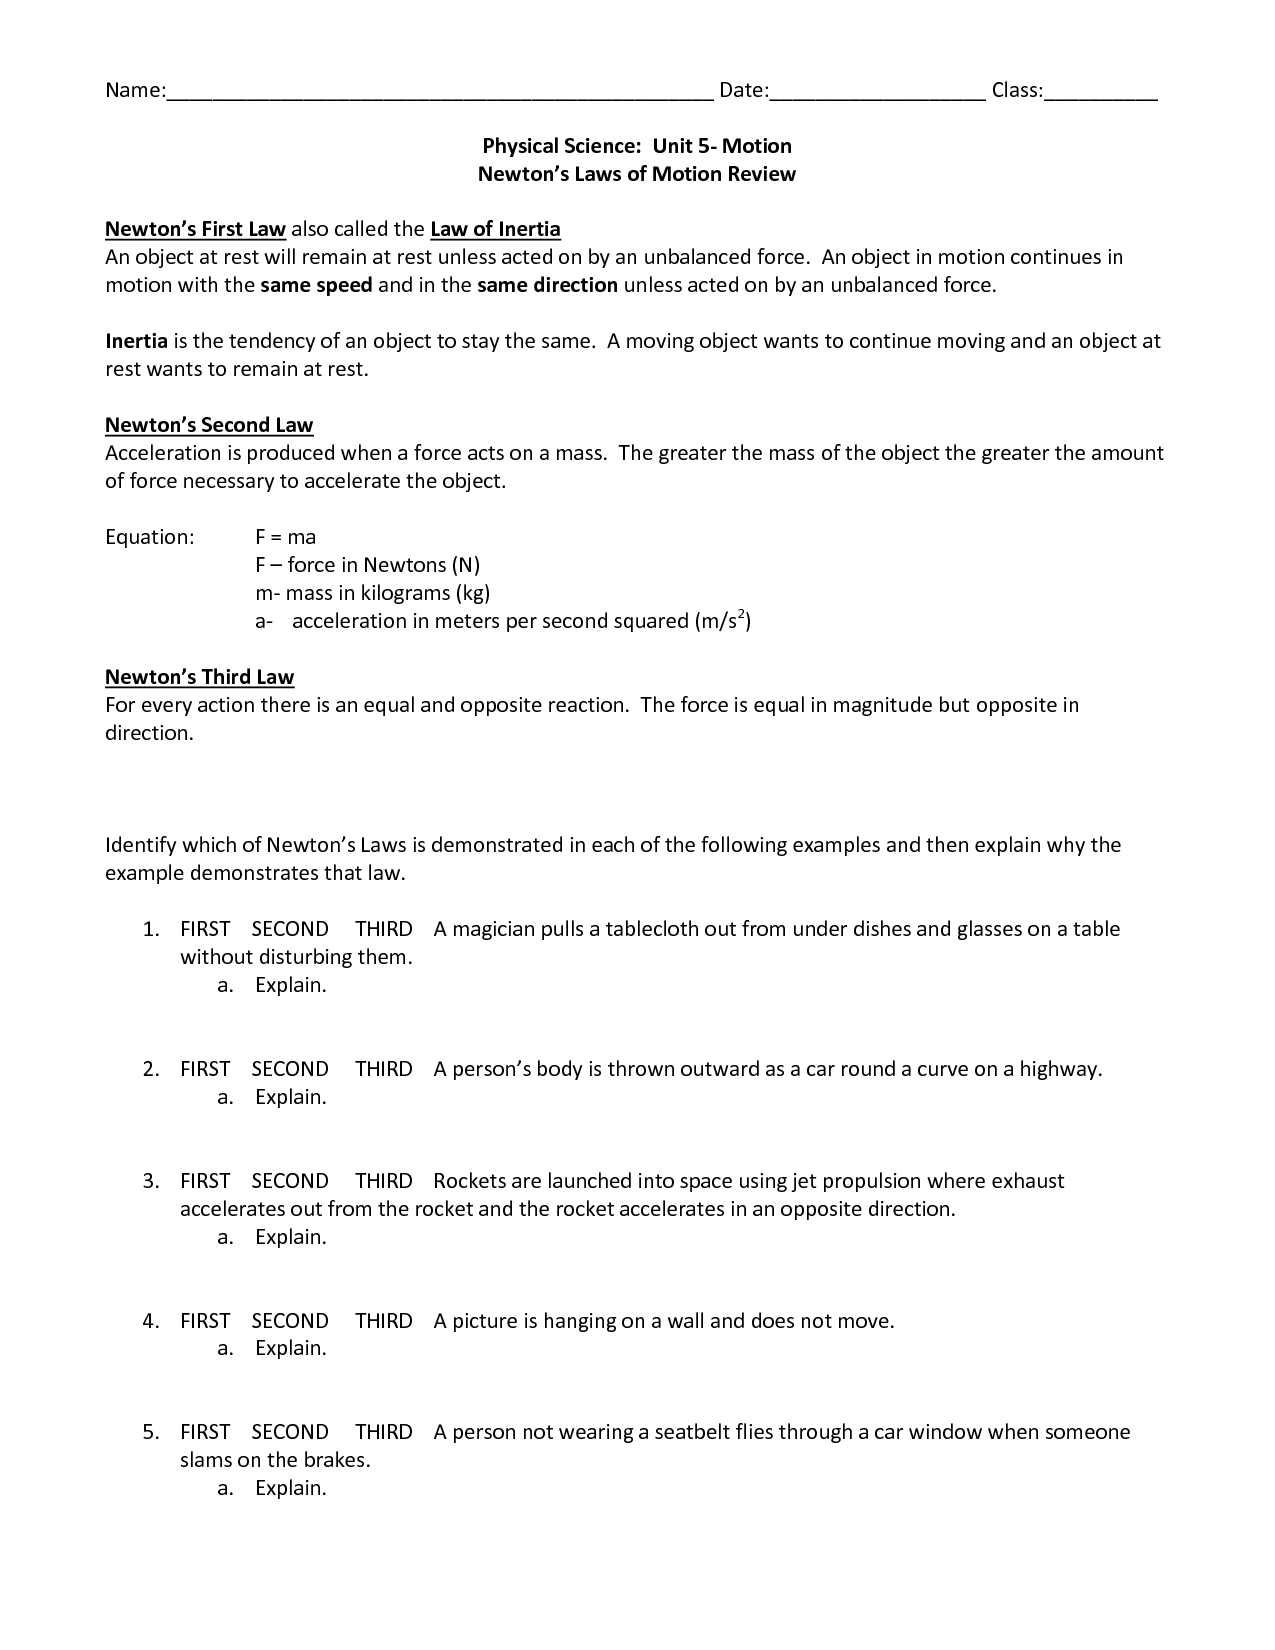 Newtons Laws Of Motion Worksheet Answers - Nidecmege With Newton039s Laws Review Worksheet Answers